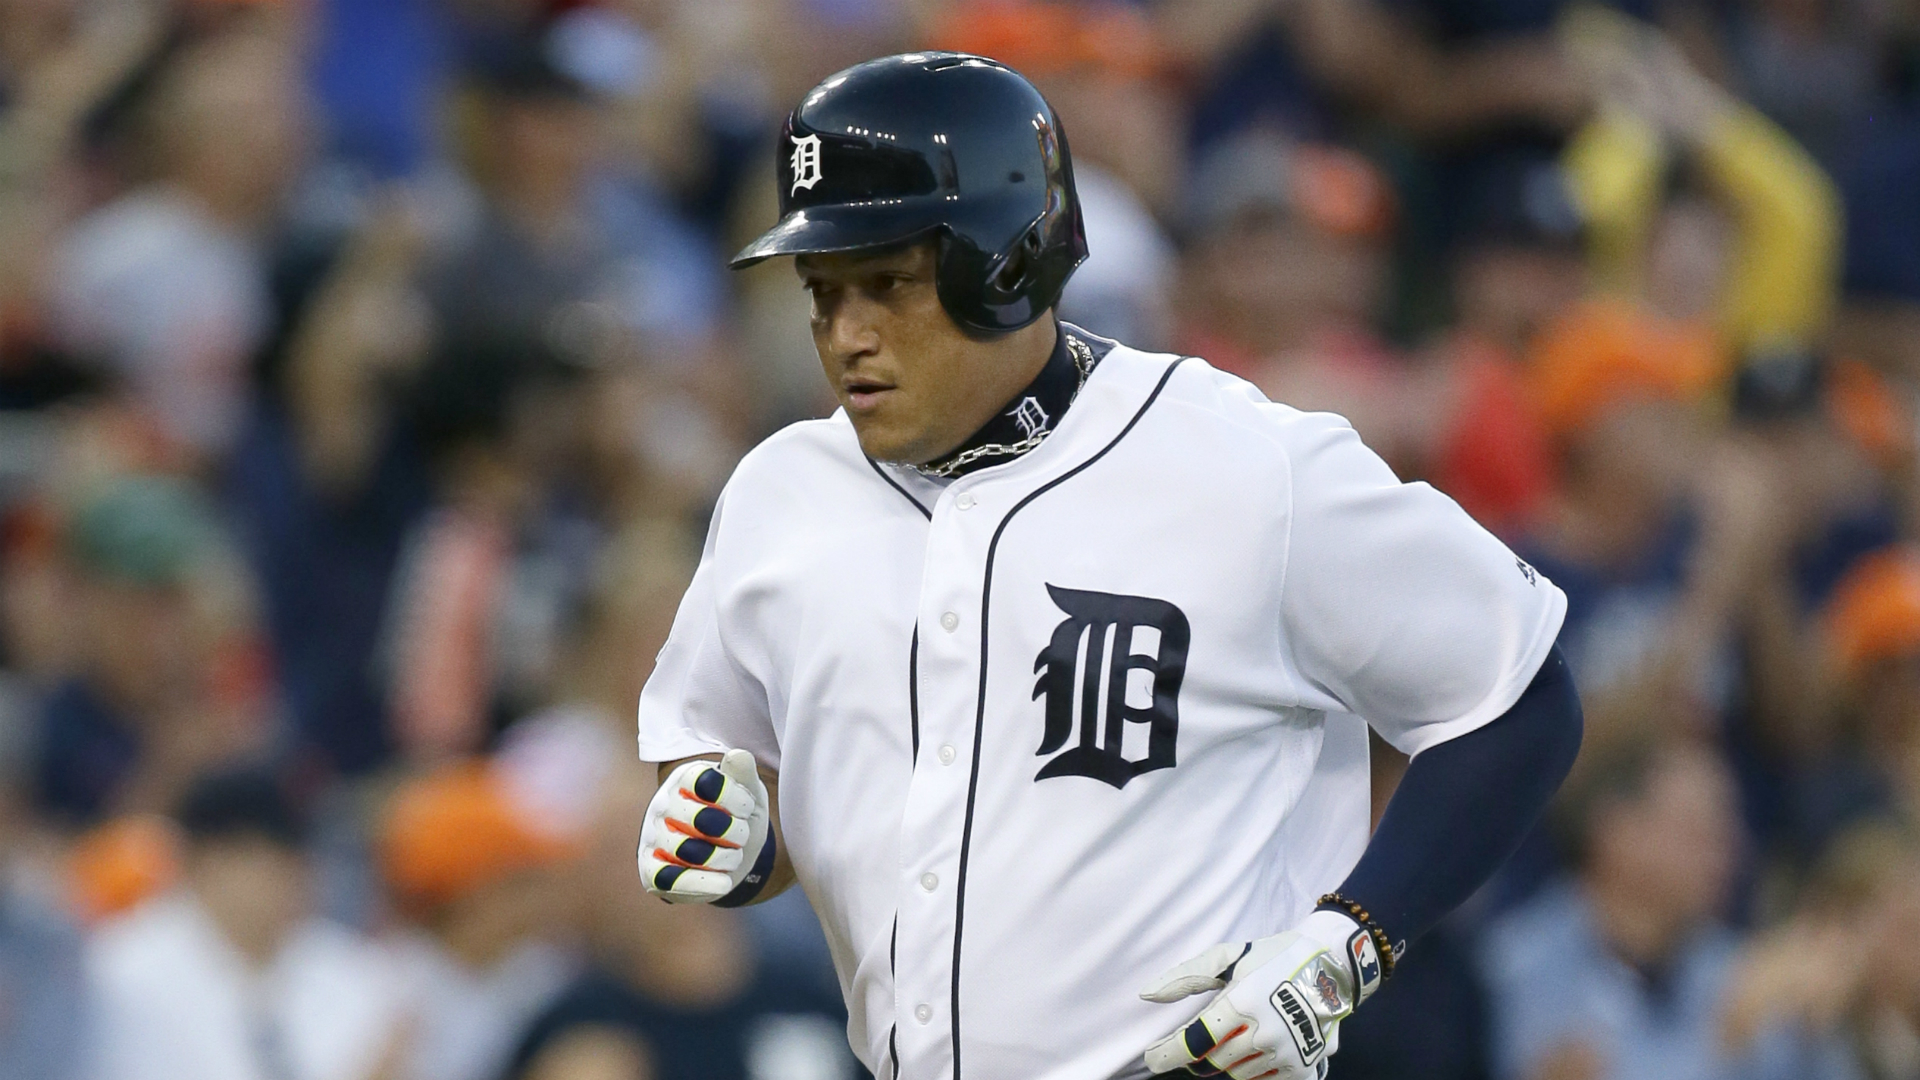 Miguel Cabrera injury update: Tigers star 'done playing hurt'; Ron Gardenhire OK with that